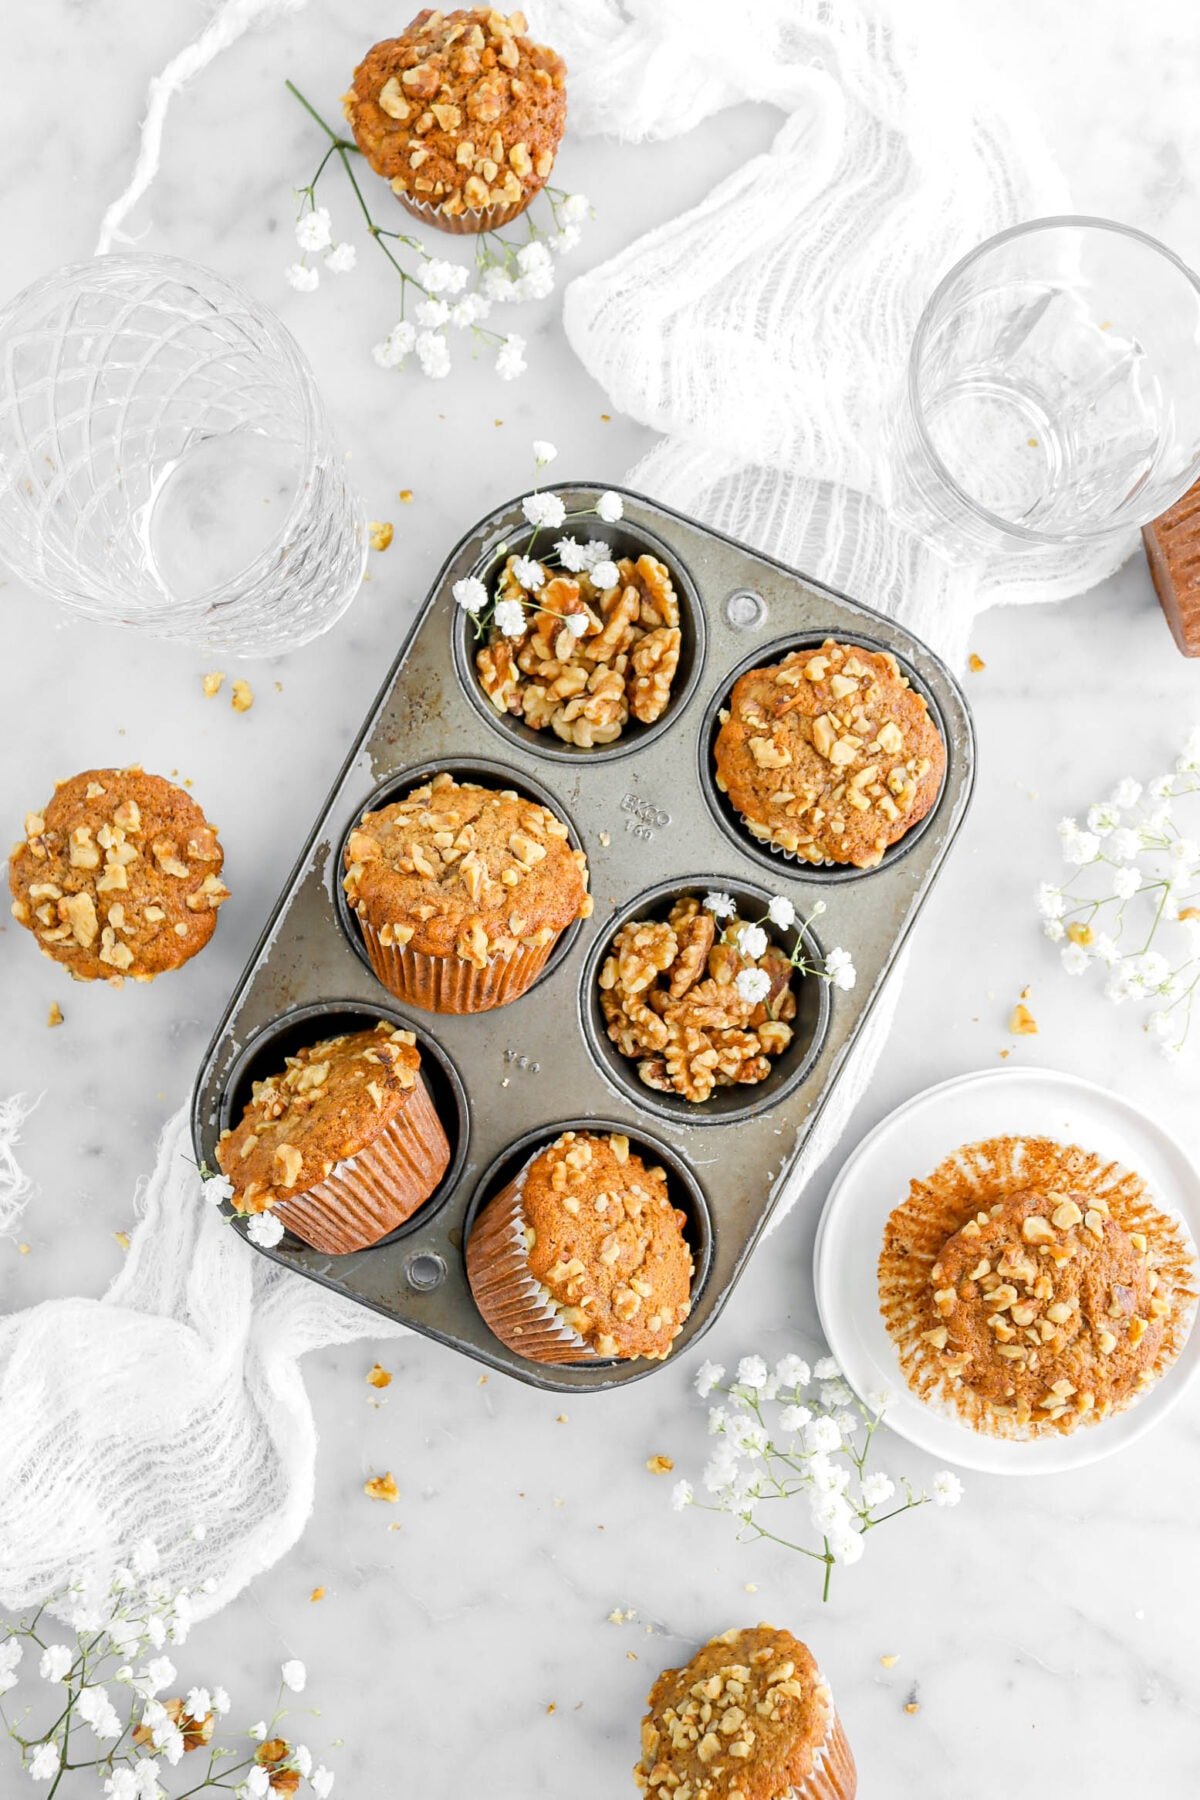 six cavity muffin pan with four muffins in it with two cavities filled with walnuts and white flowers with more muffins and flowers around on marble surface, with two empty glasses and white cheesecloth.